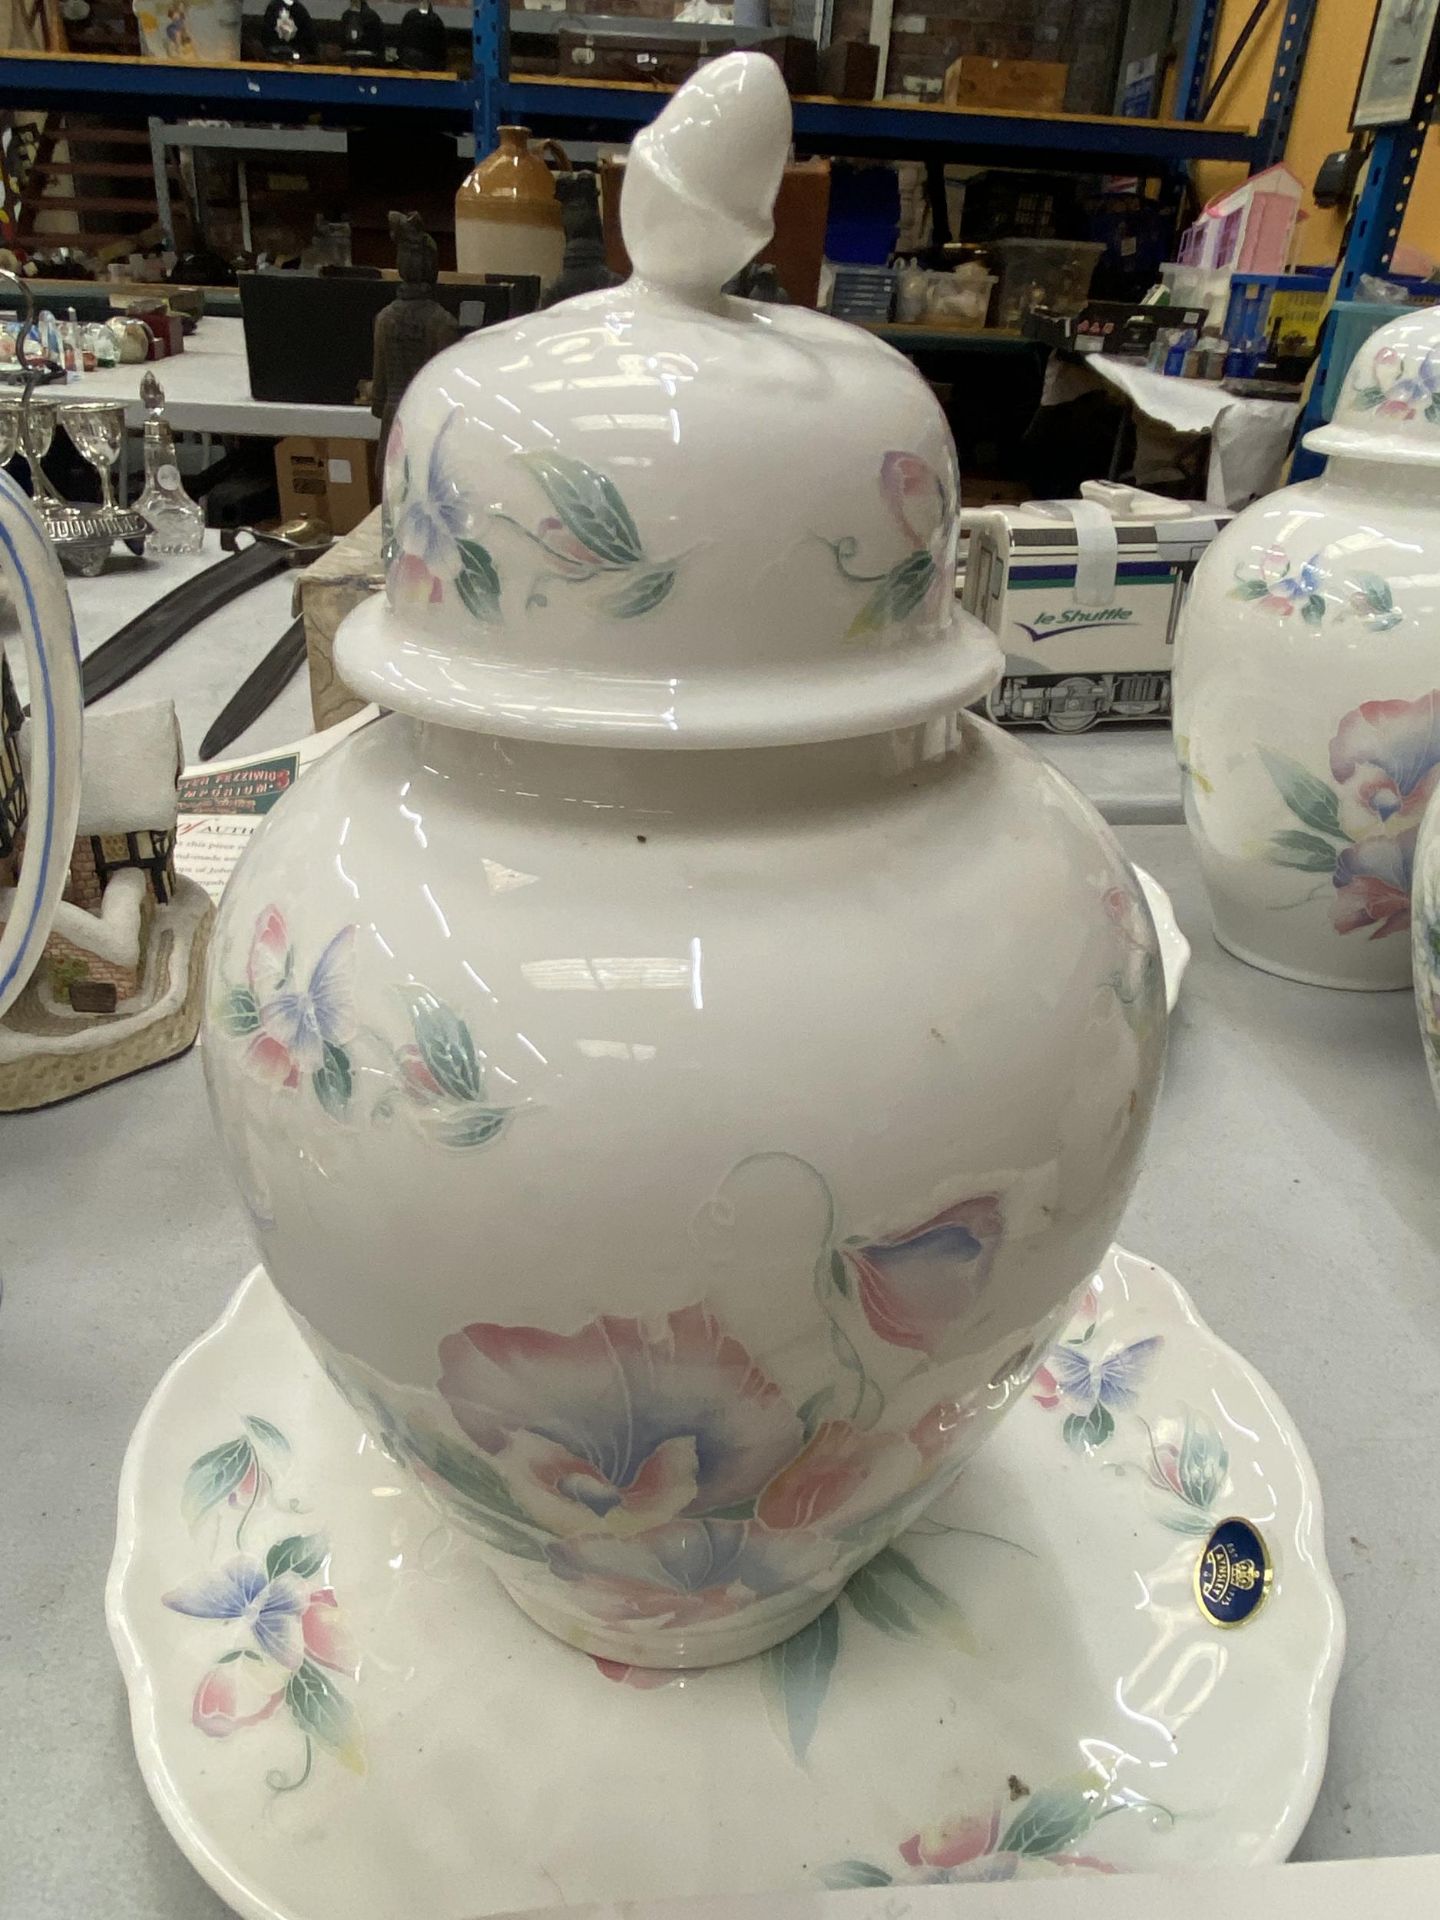 A QUANTITY OF CHINA ITEMS TO INCLUDE A RETRO FENTON COFFEE POT, AYNSLEY LIDDED POTS, A PLANTER, - Image 9 of 9